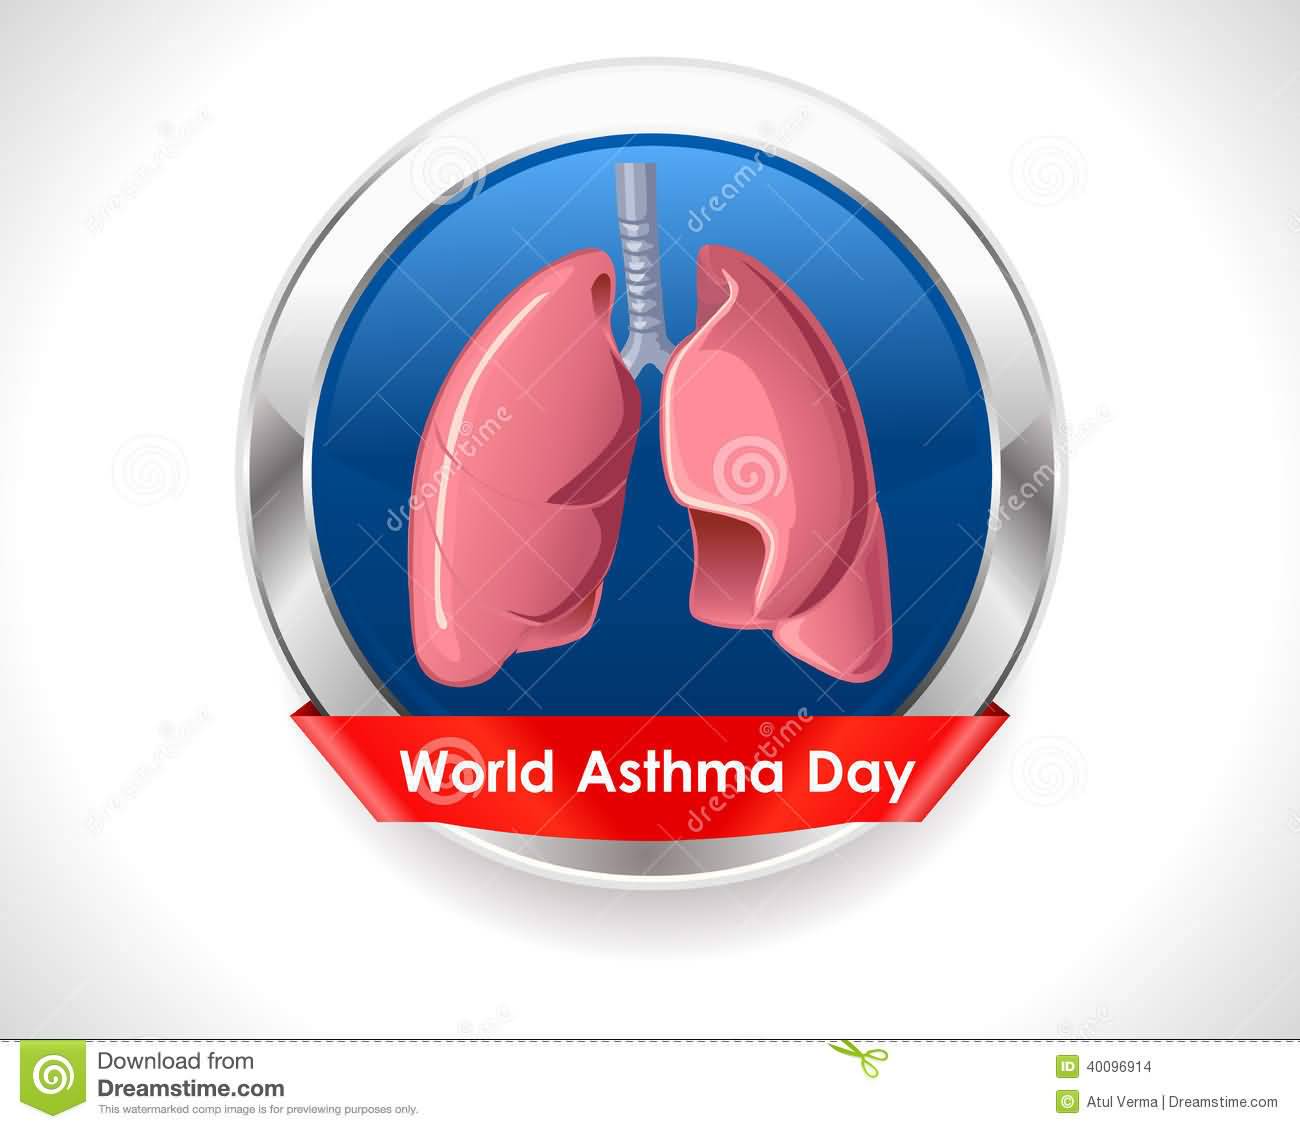 World Asthma Day Lungs Badge Illustration